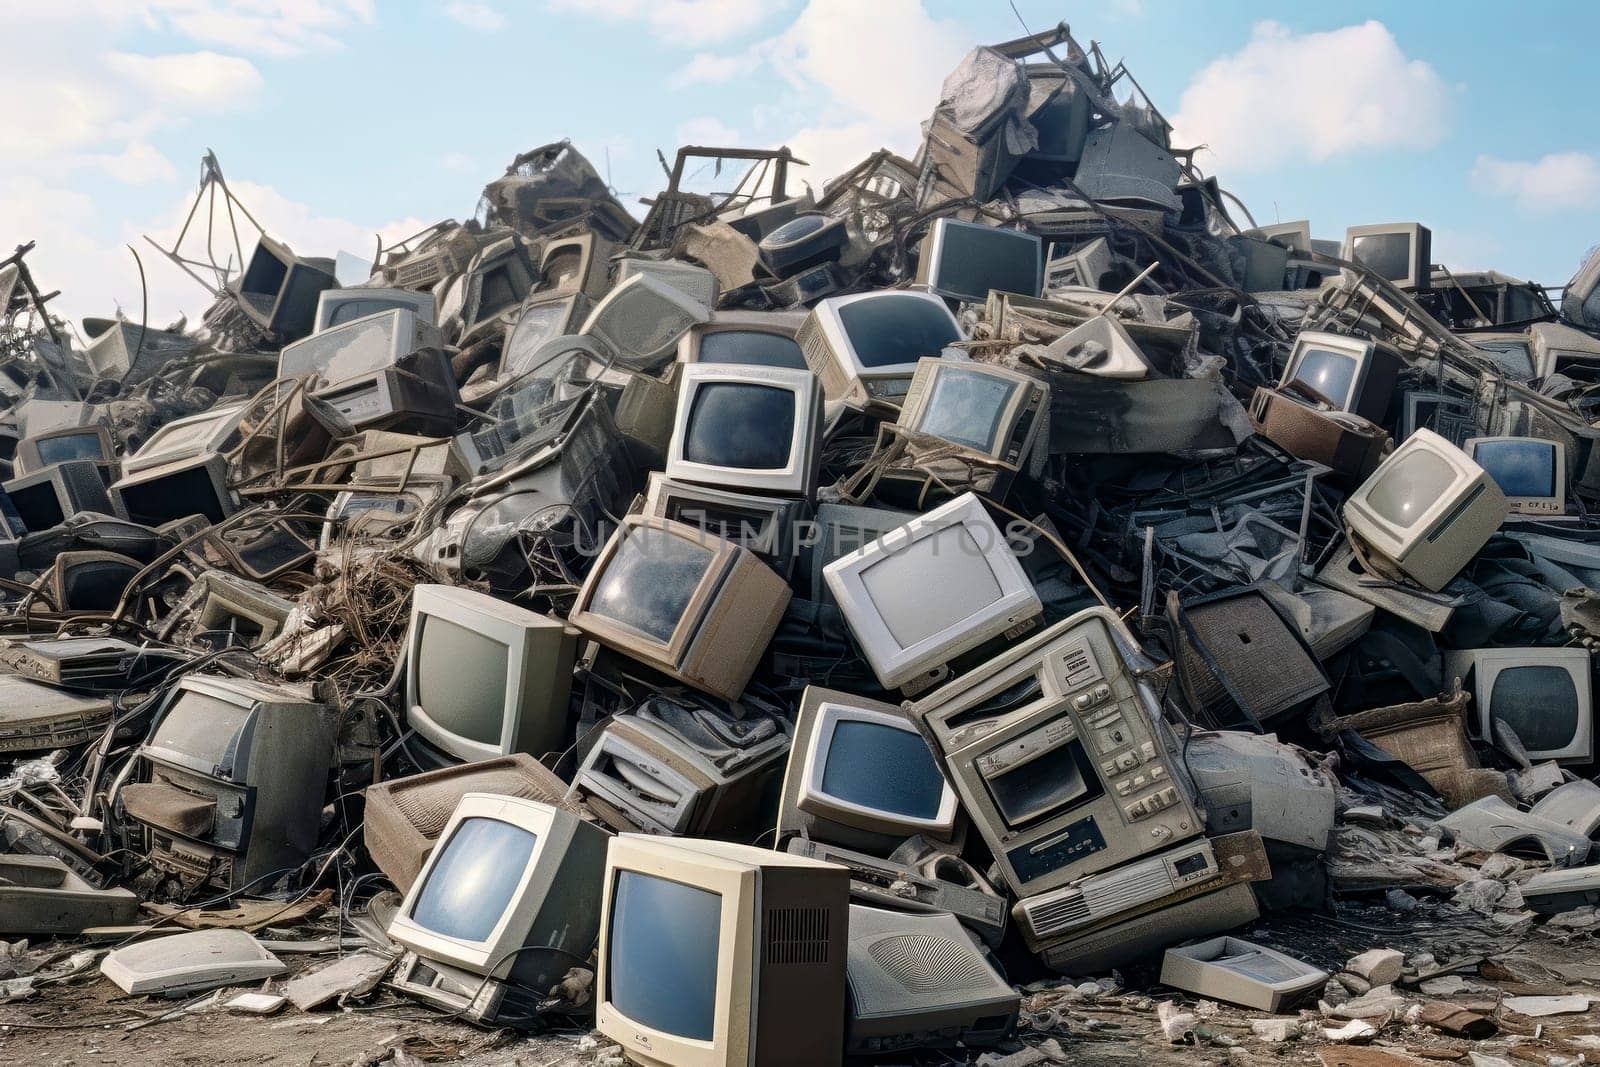 An impactful image capturing a pile of old computers discarded in a landfill, symbolizing technological obsolescence.